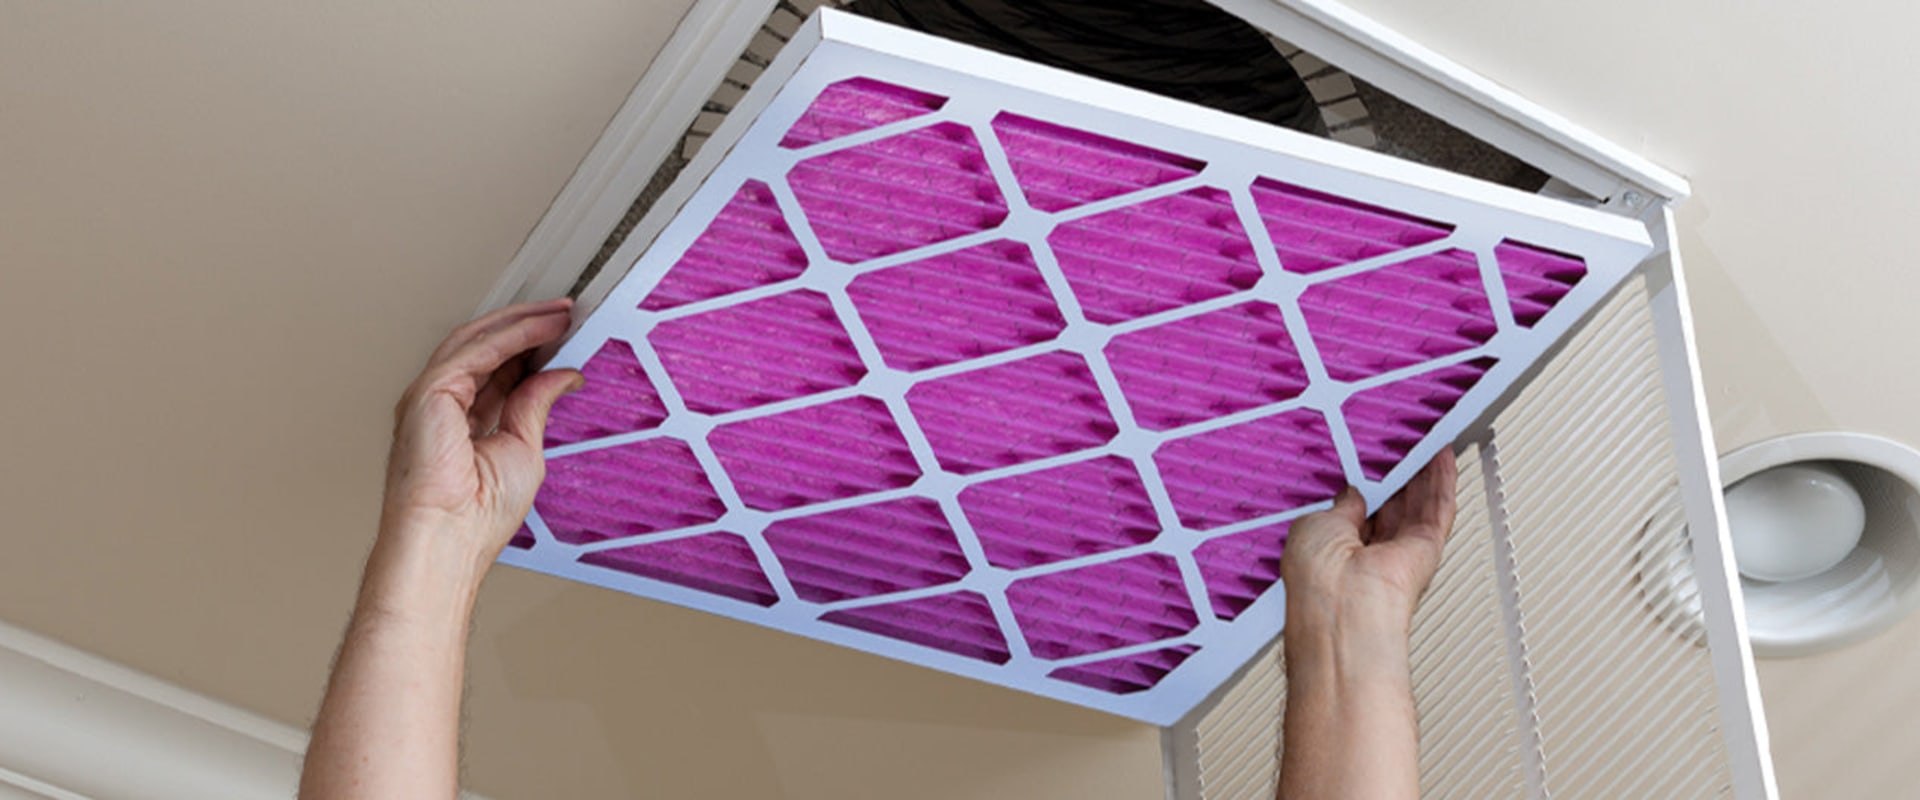 How to Choose the Right MERV Rating for Furnace Air Filters